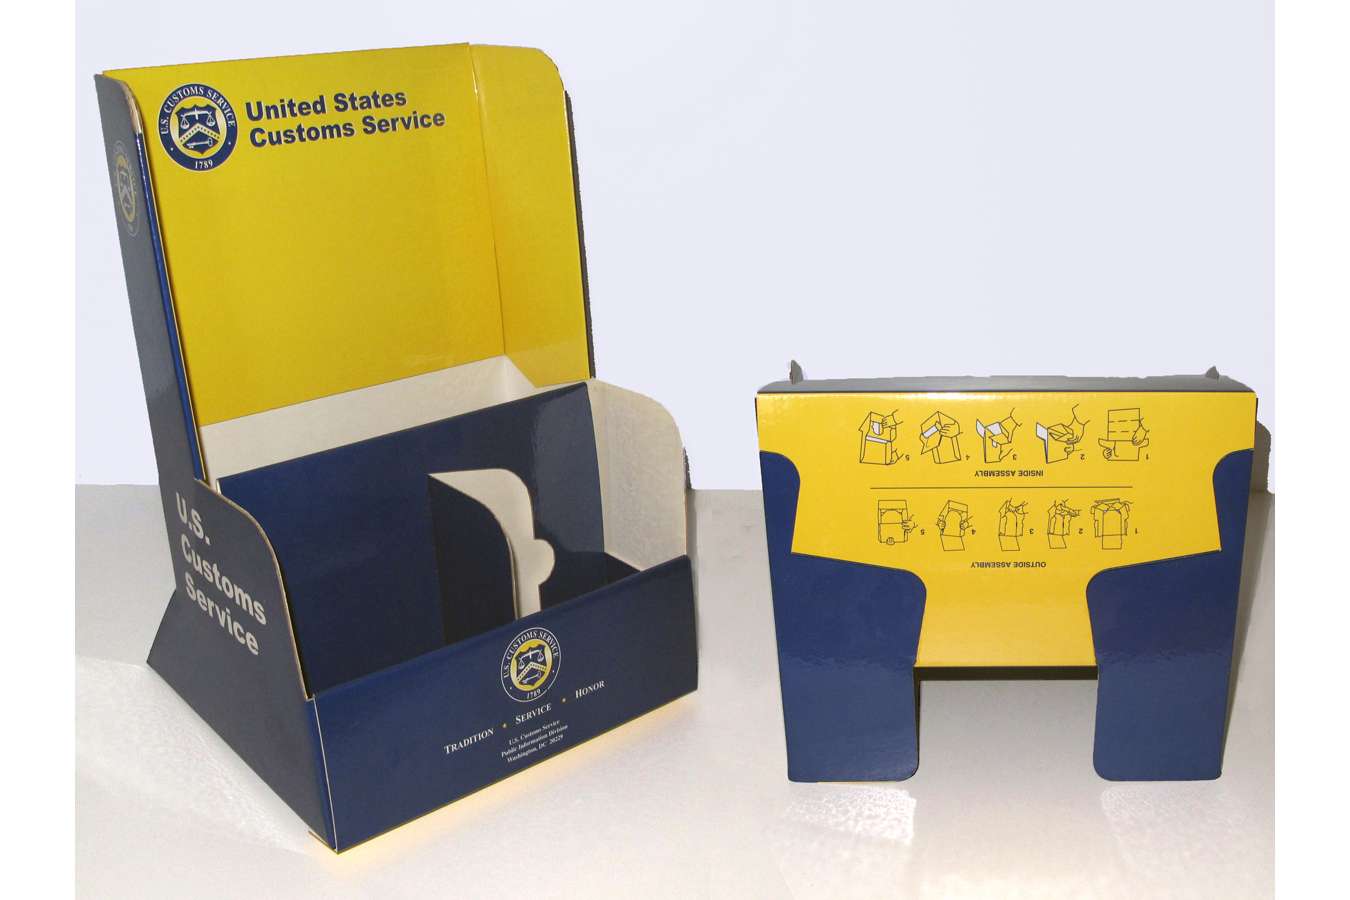 USCBP 6 Holder : US Customs brochure holders used at airports and ports of entry to the USA